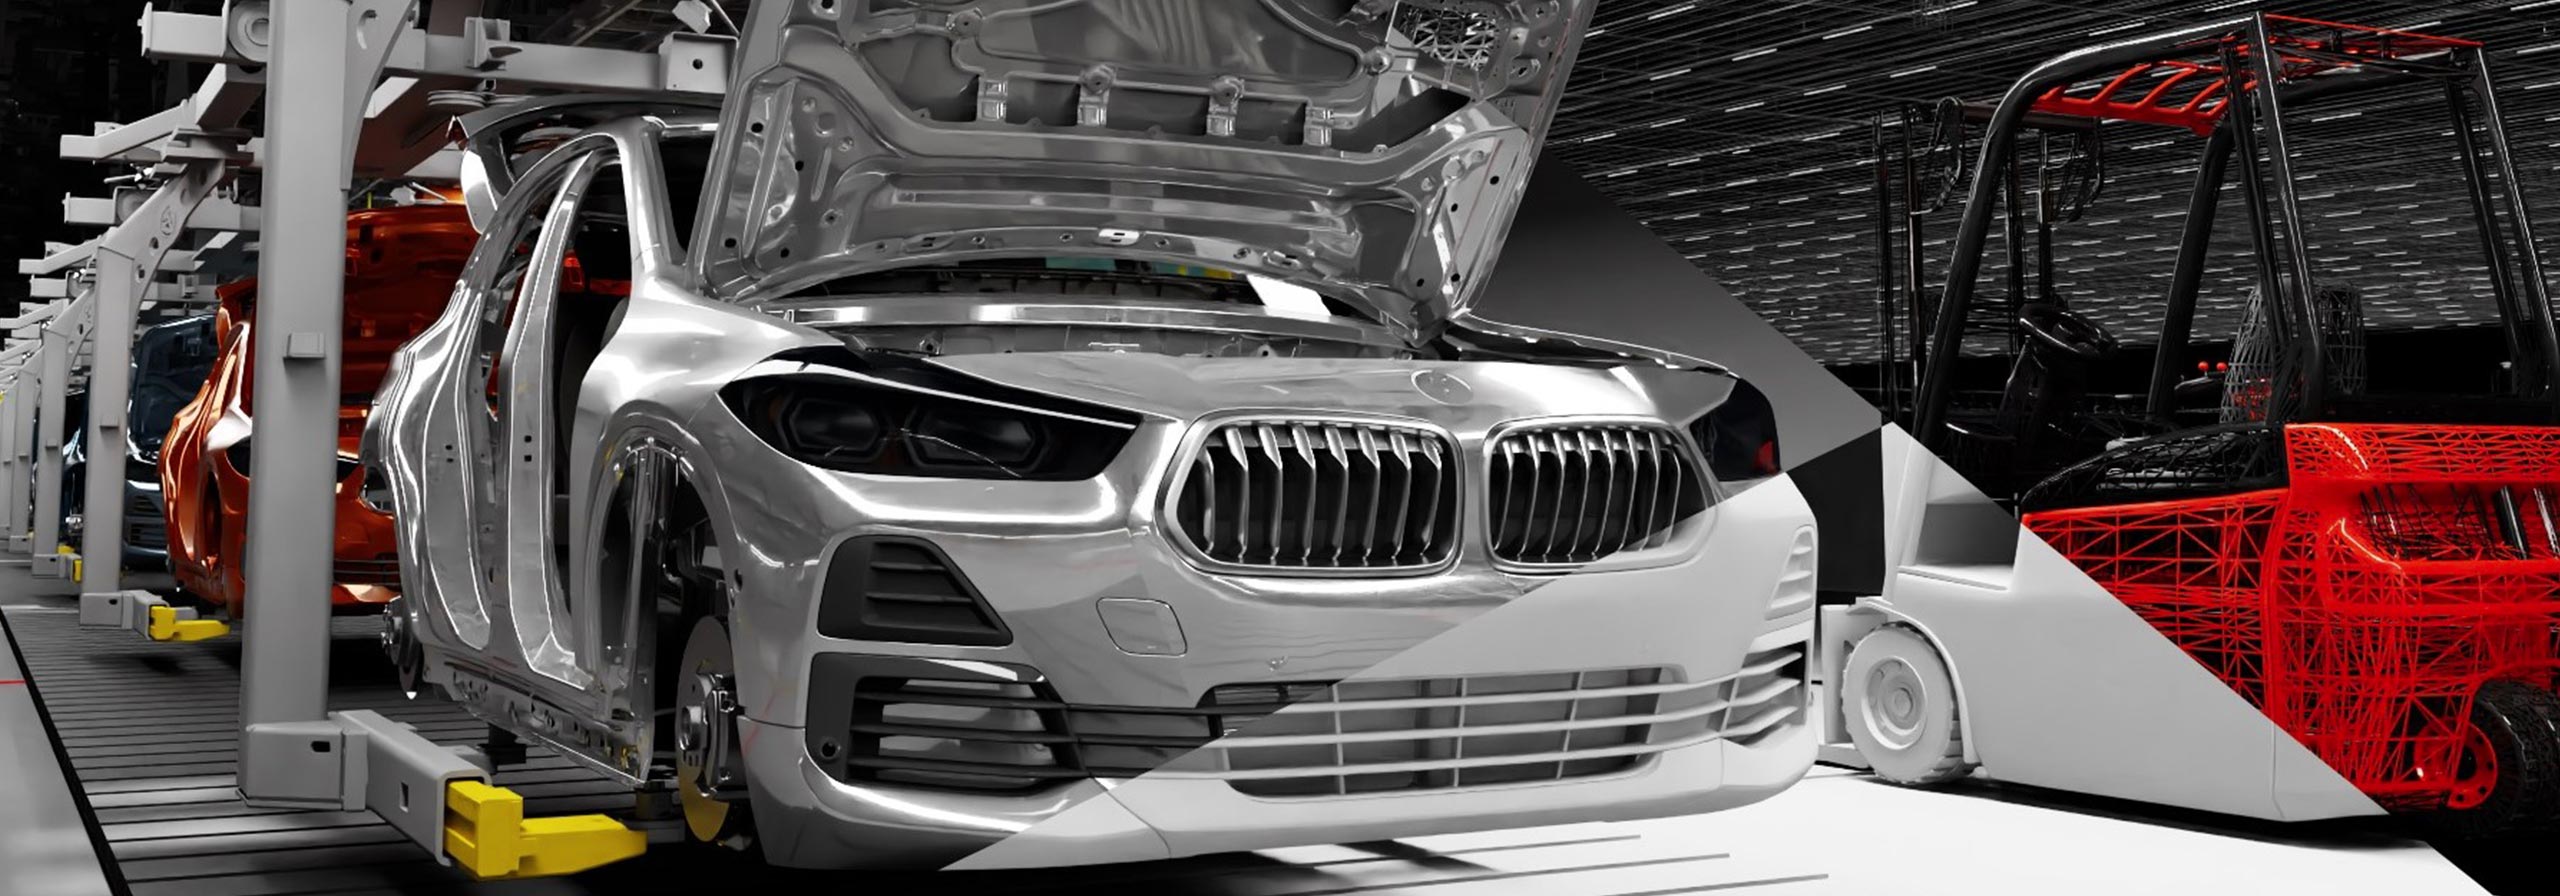 5 Important Qualities to Look for in a BMW Mechanic